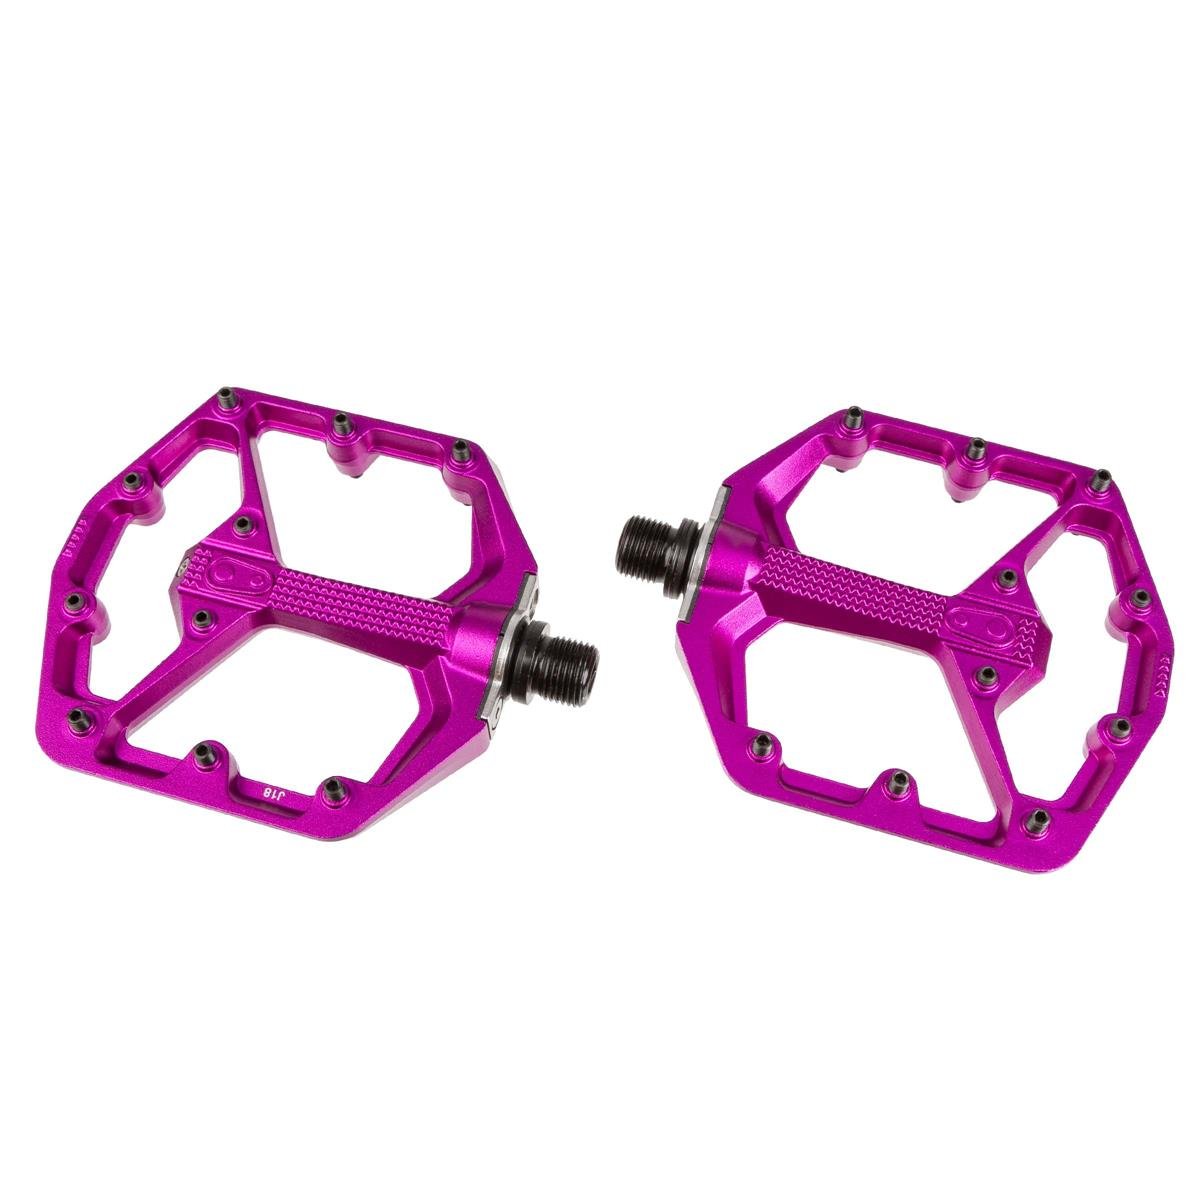 Crankbrothers Pedali Stamp 7 Limited Edition, Viola, Small